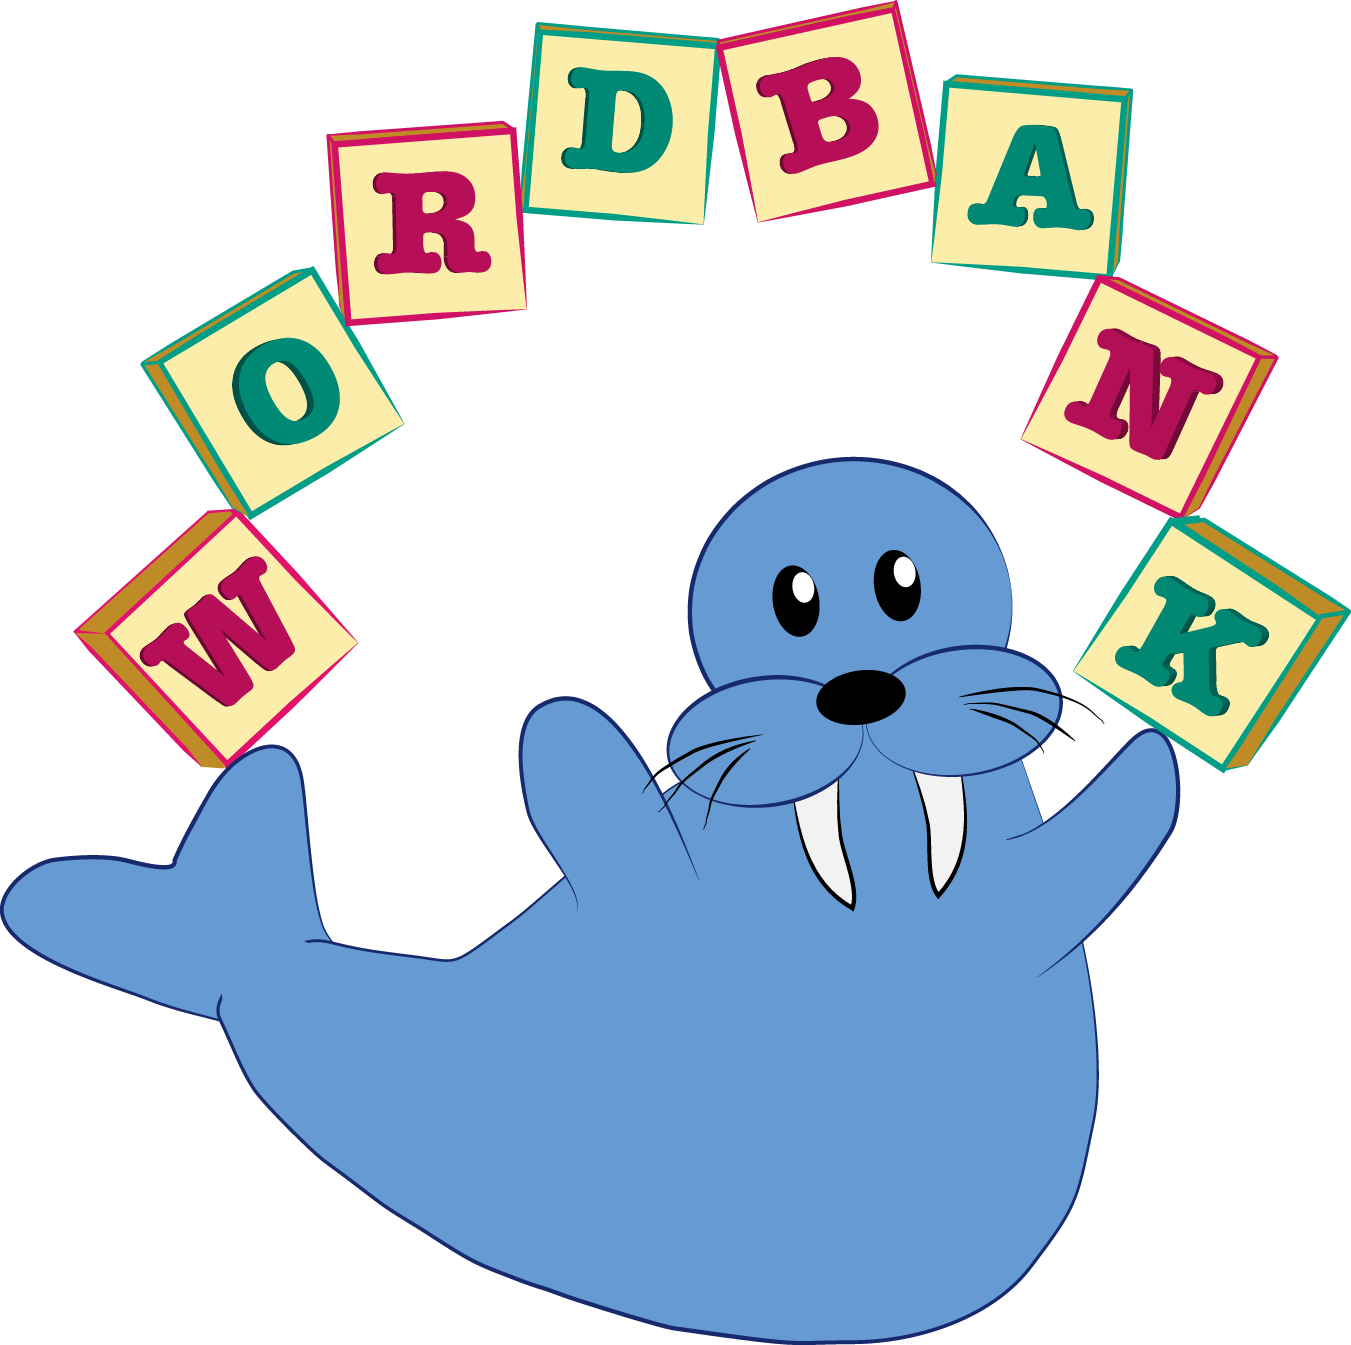 Wordbank an open database. Dictionary clipart vocabulary